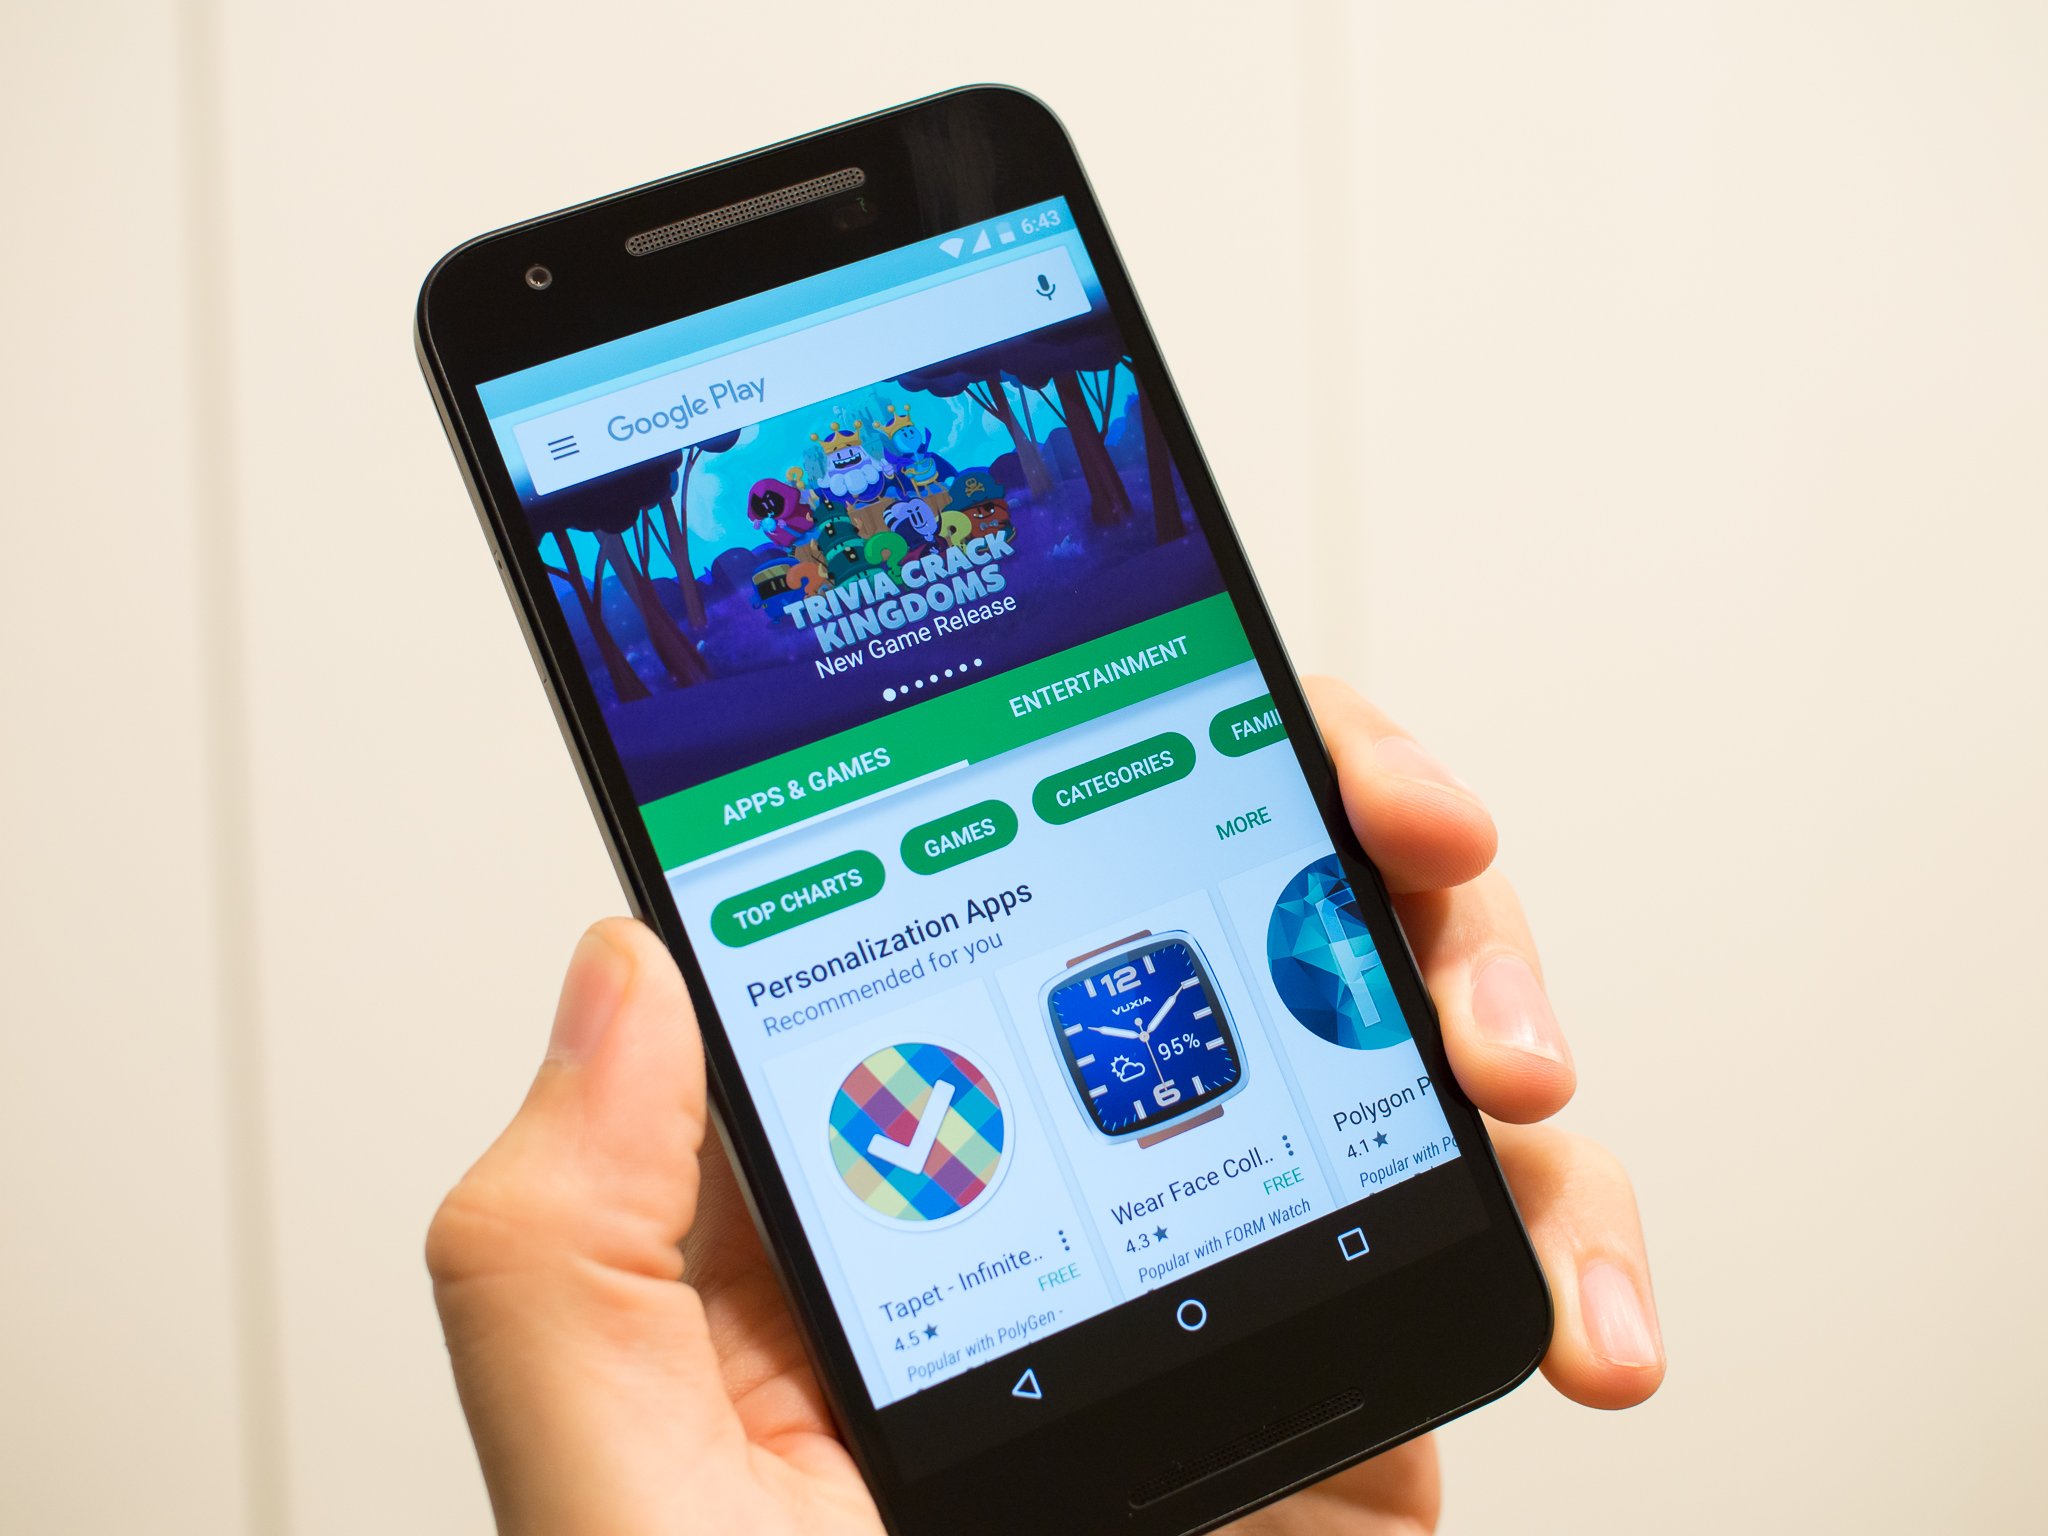 Google Play now supports promo codes for apps and in-app purchases